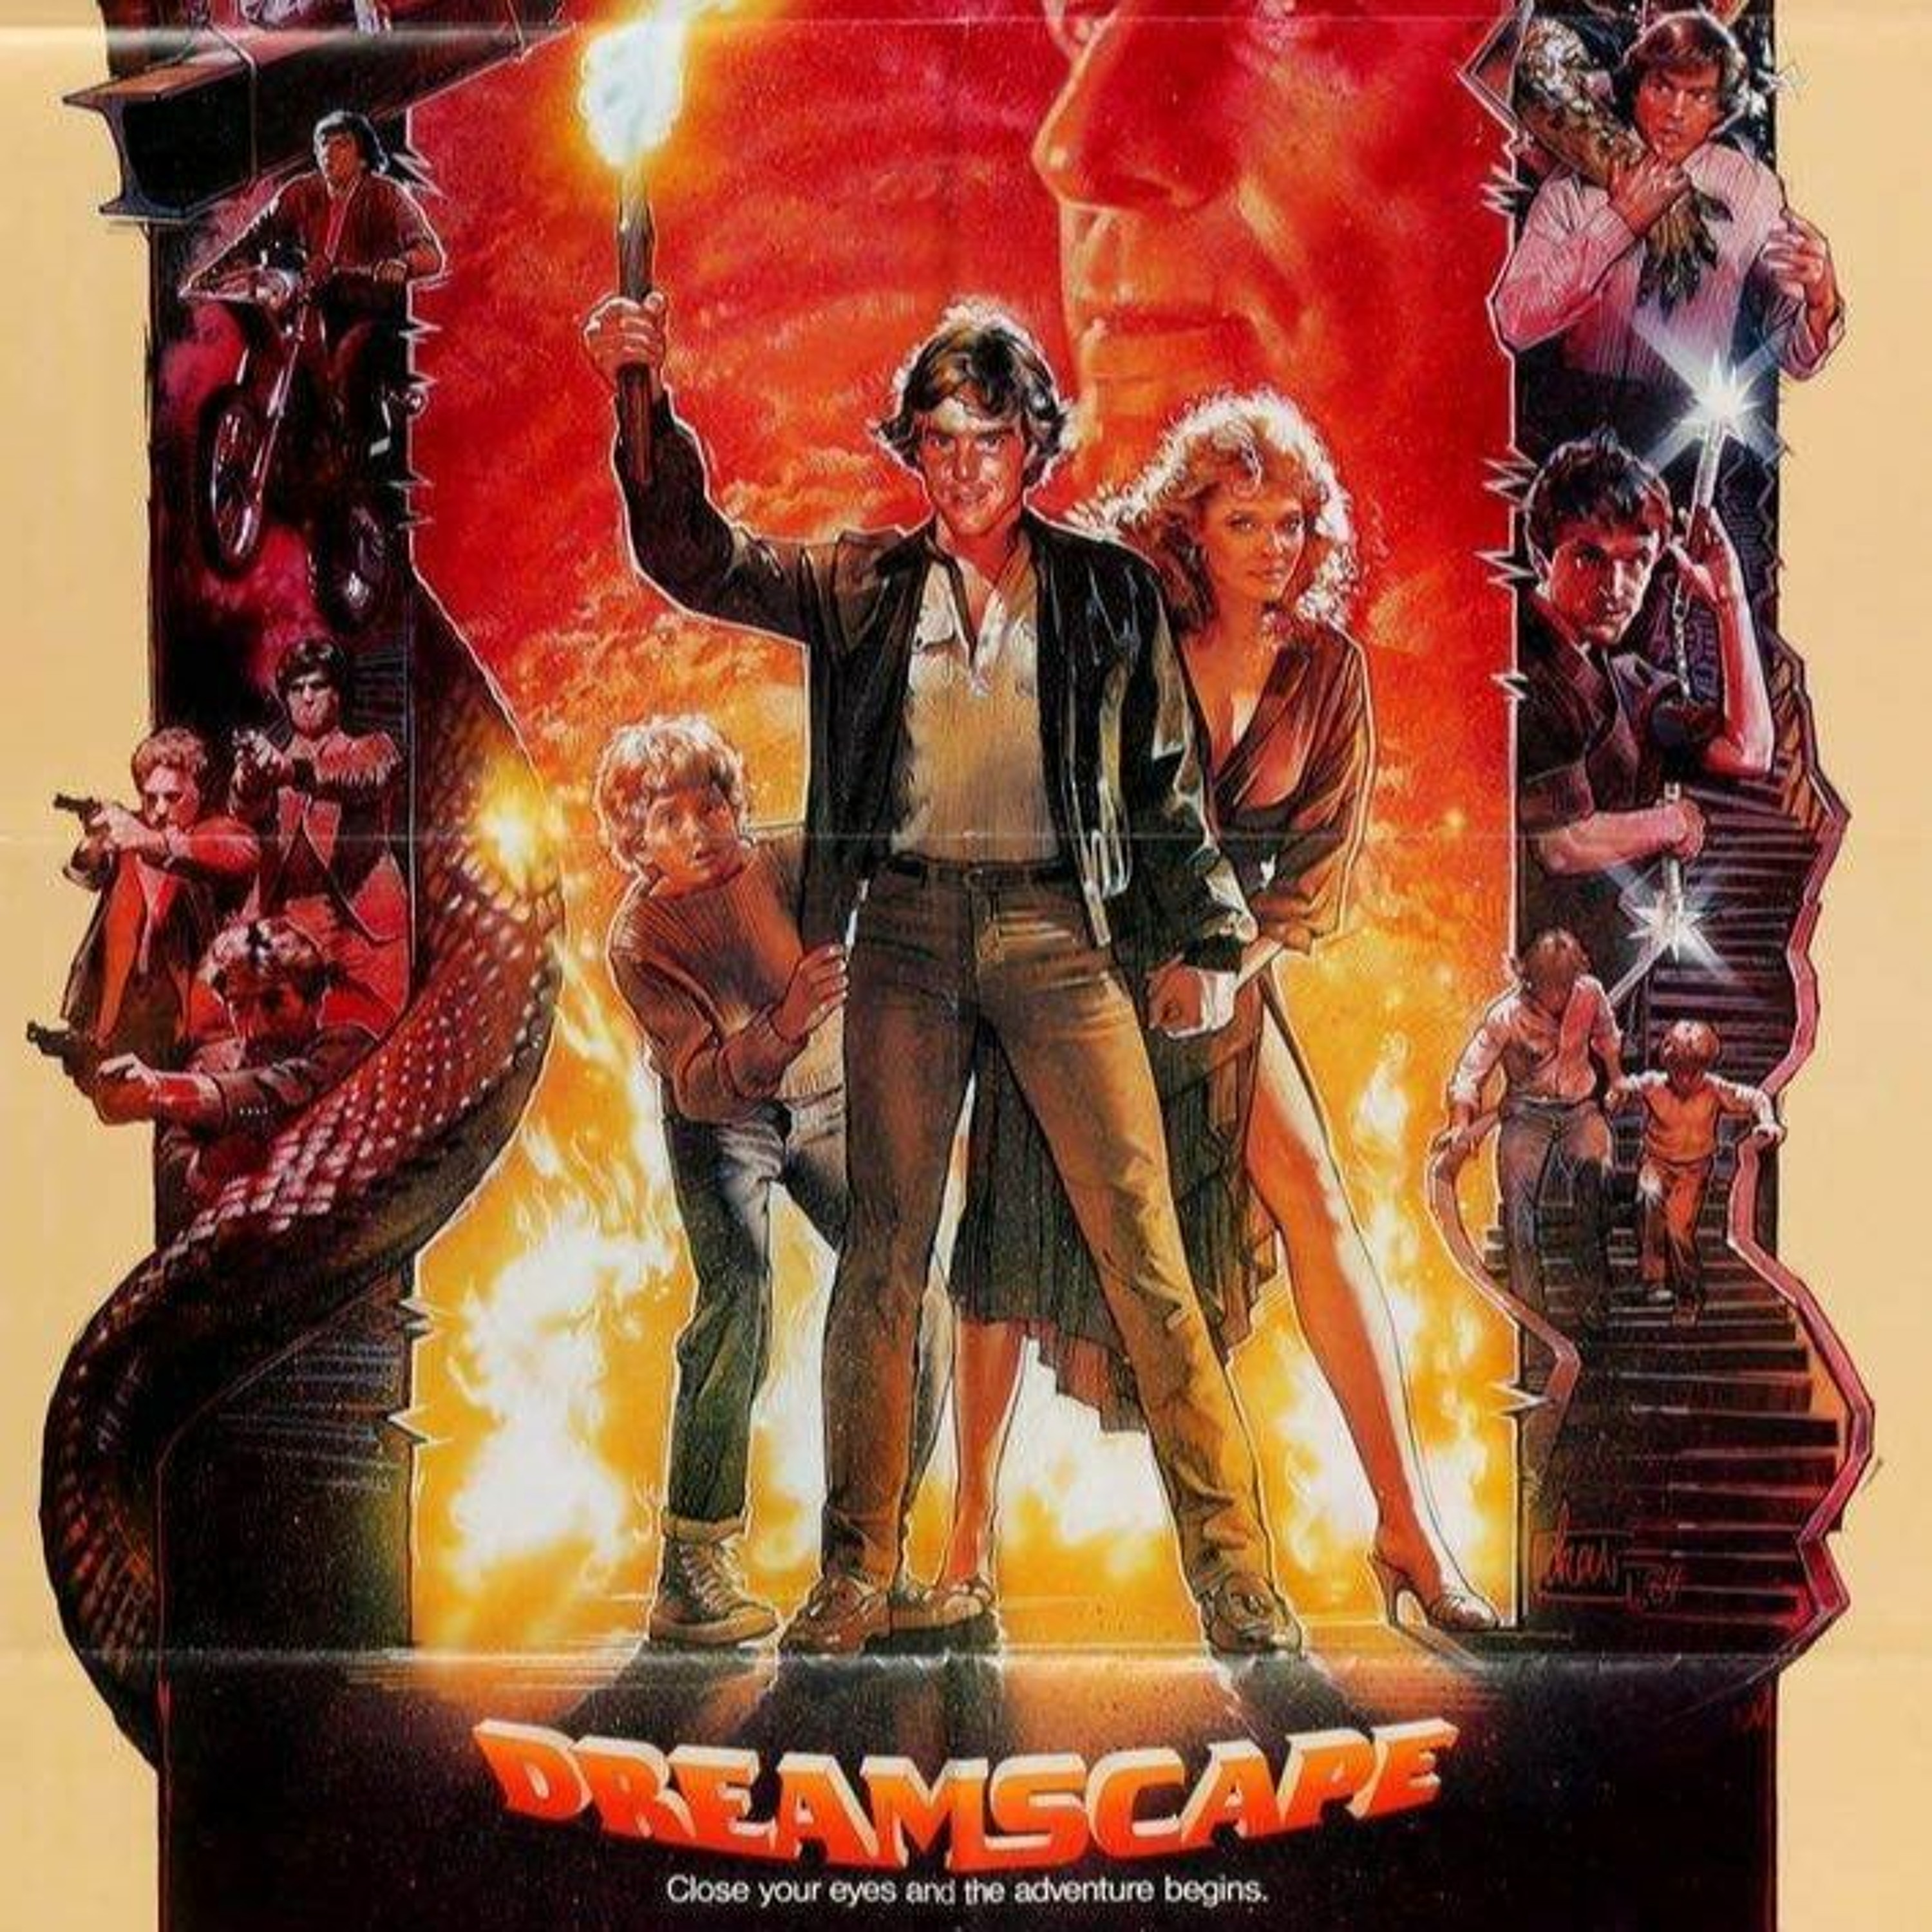 Would You Watch - Dreamscape